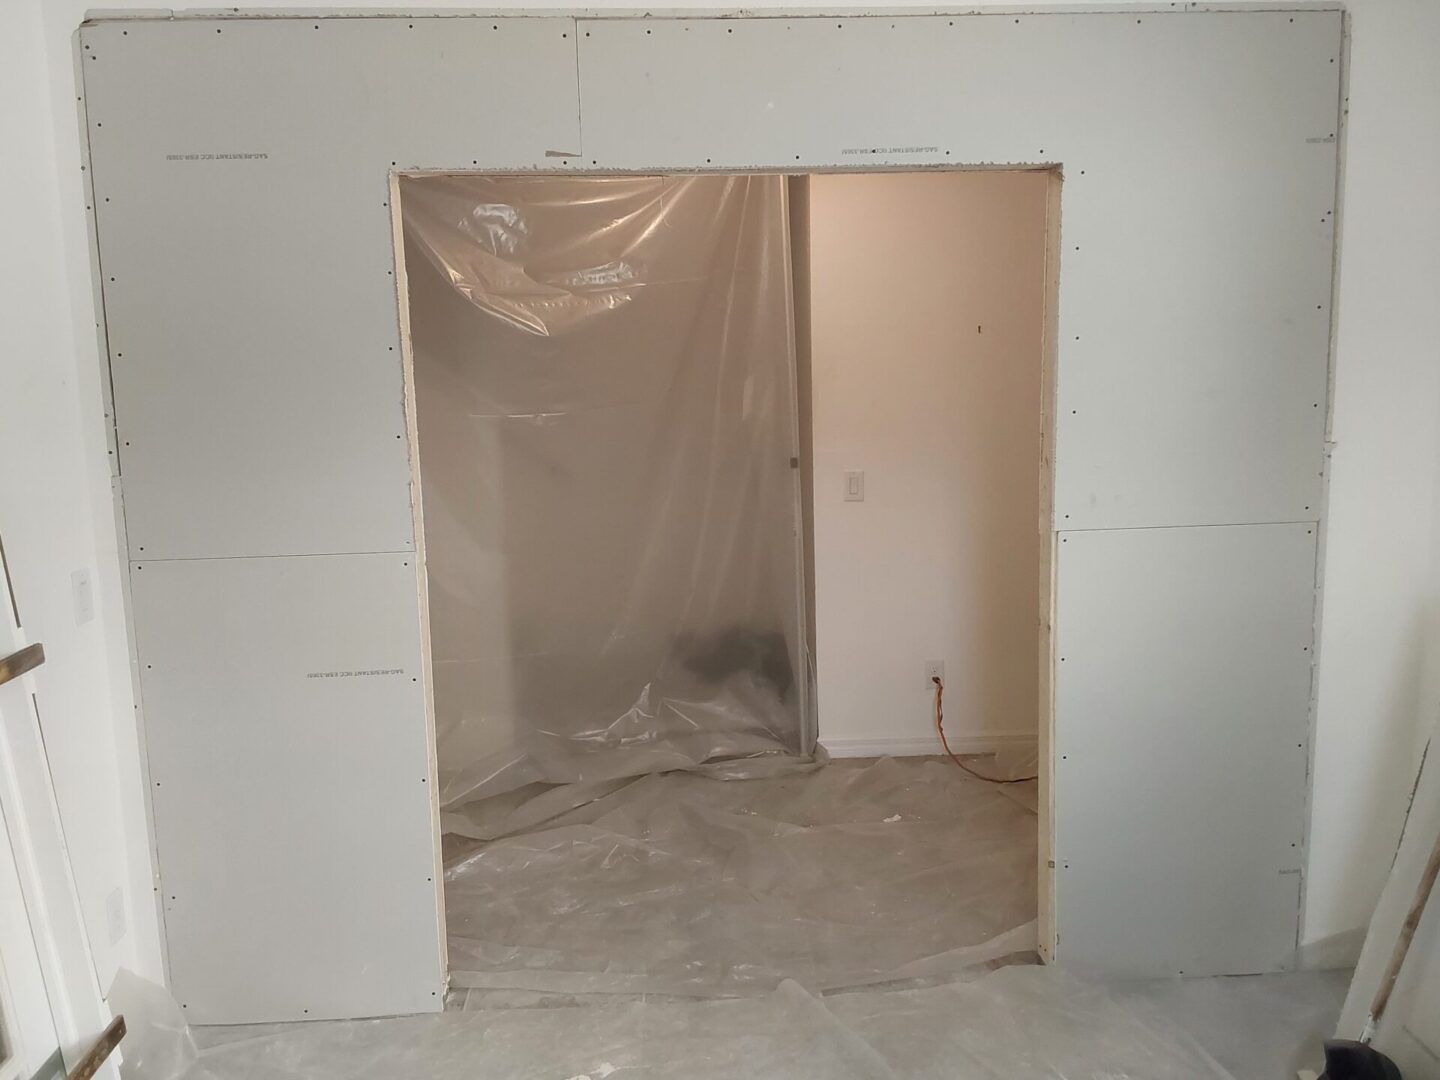 A room with walls and doors covered in plastic.